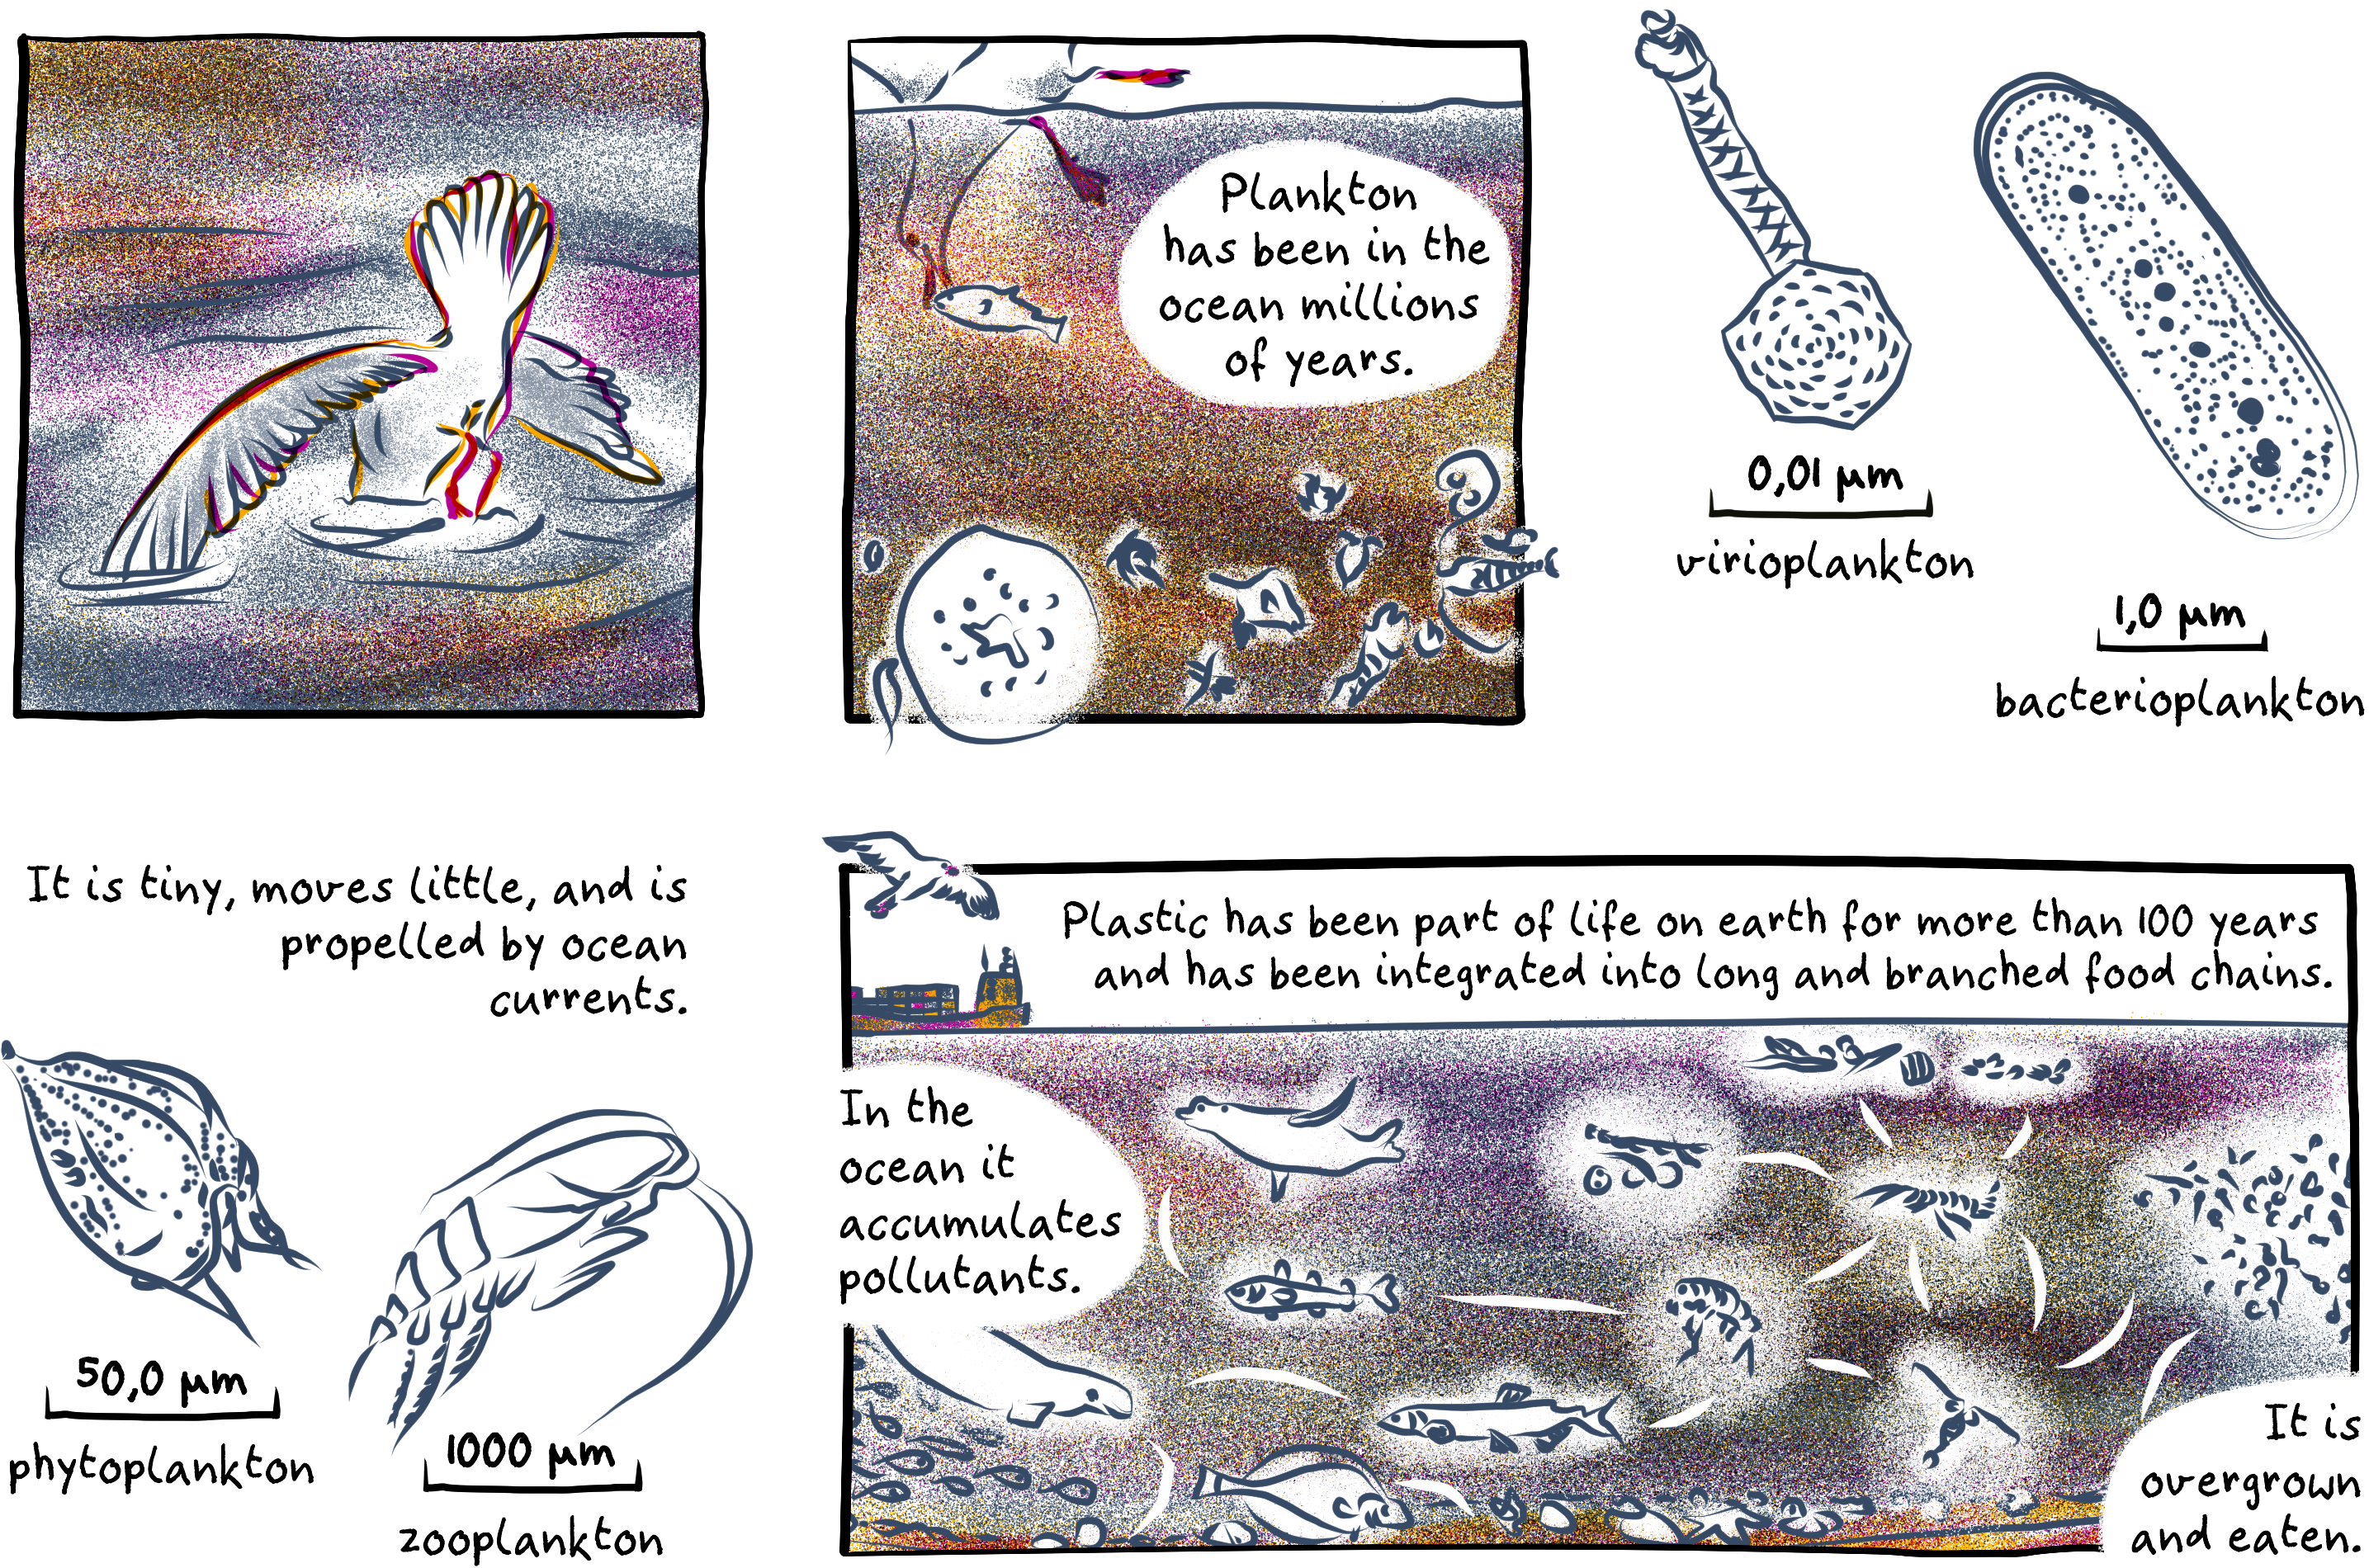 Excerpt from the comic. 
A seagull dives into the ocean to catch a fish. Enlarged the outlines of different kind of plankton are displayed. Plankton has been in the ocean millions of years. It is tiny, moves little, and is propelled by ocean currents.
Virioplankton, a virus with a hexagonal head and a long shaft is shown. A marker indicates a size of 0,01 micrometers.
Bakterioplankton, an elongated bacterium displayed with its cell nucleus and cell details. A marker indicates one micrometer.
Phytoplankton, a roundish plankton body with a sharp tip and two little whips is displayed. A marker indicates 50 micrometers.
Zooplankton, a little crab with long tentacles is displayed. A marker indicates 50 micrometers.
In a vertical cross section through the ocean different animals and marine life forms are connected to a food chain network. At the ocean surface a ship with huge containers passes by and above the seagull.
Plastic has been part of life on earth for more than 100 years and has been integrated into long and branched food chains. In the ocean it accumulates pollutants. It is overgrown and eaten.